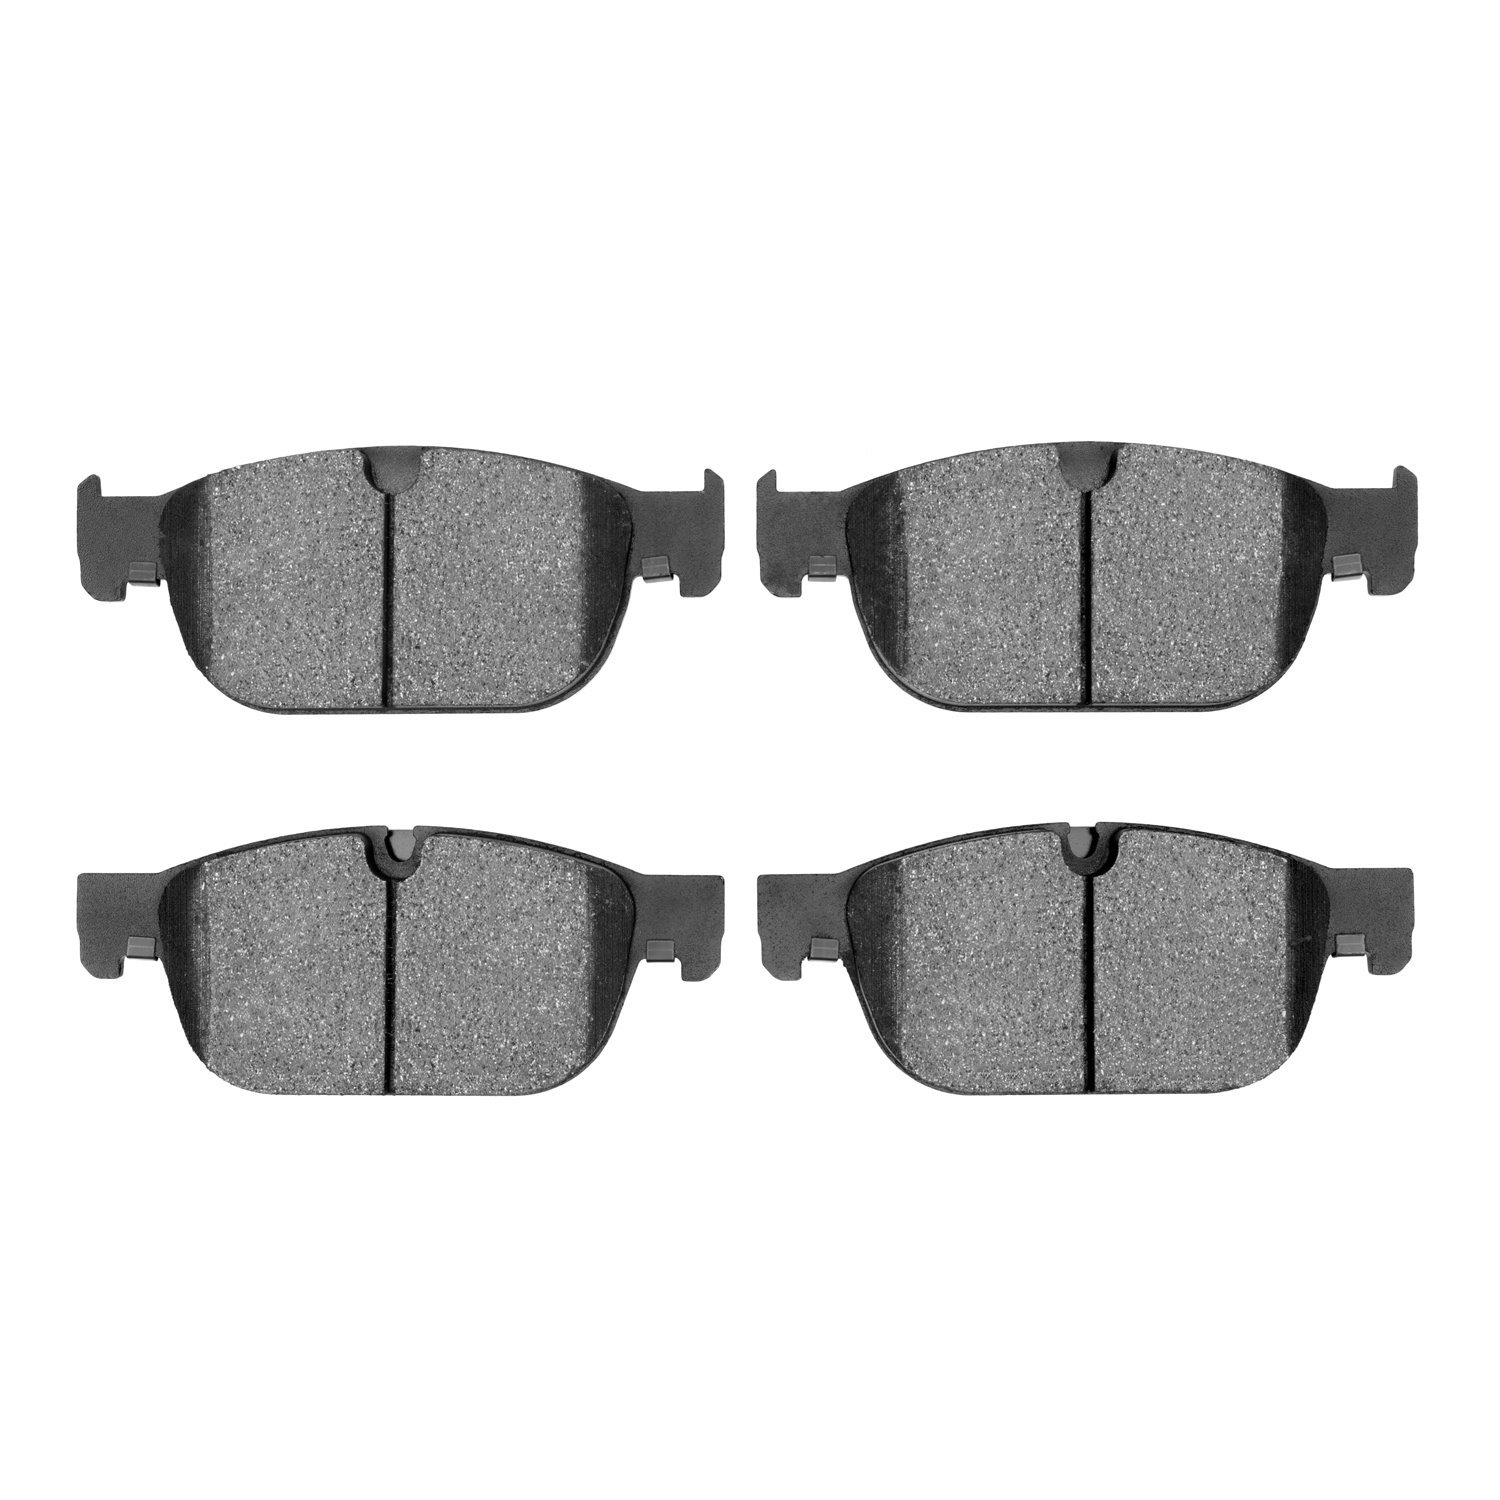 1551-1865-00 5000 Advanced Low-Metallic Brake Pads, Fits Select Multiple Makes/Models, Position: Front